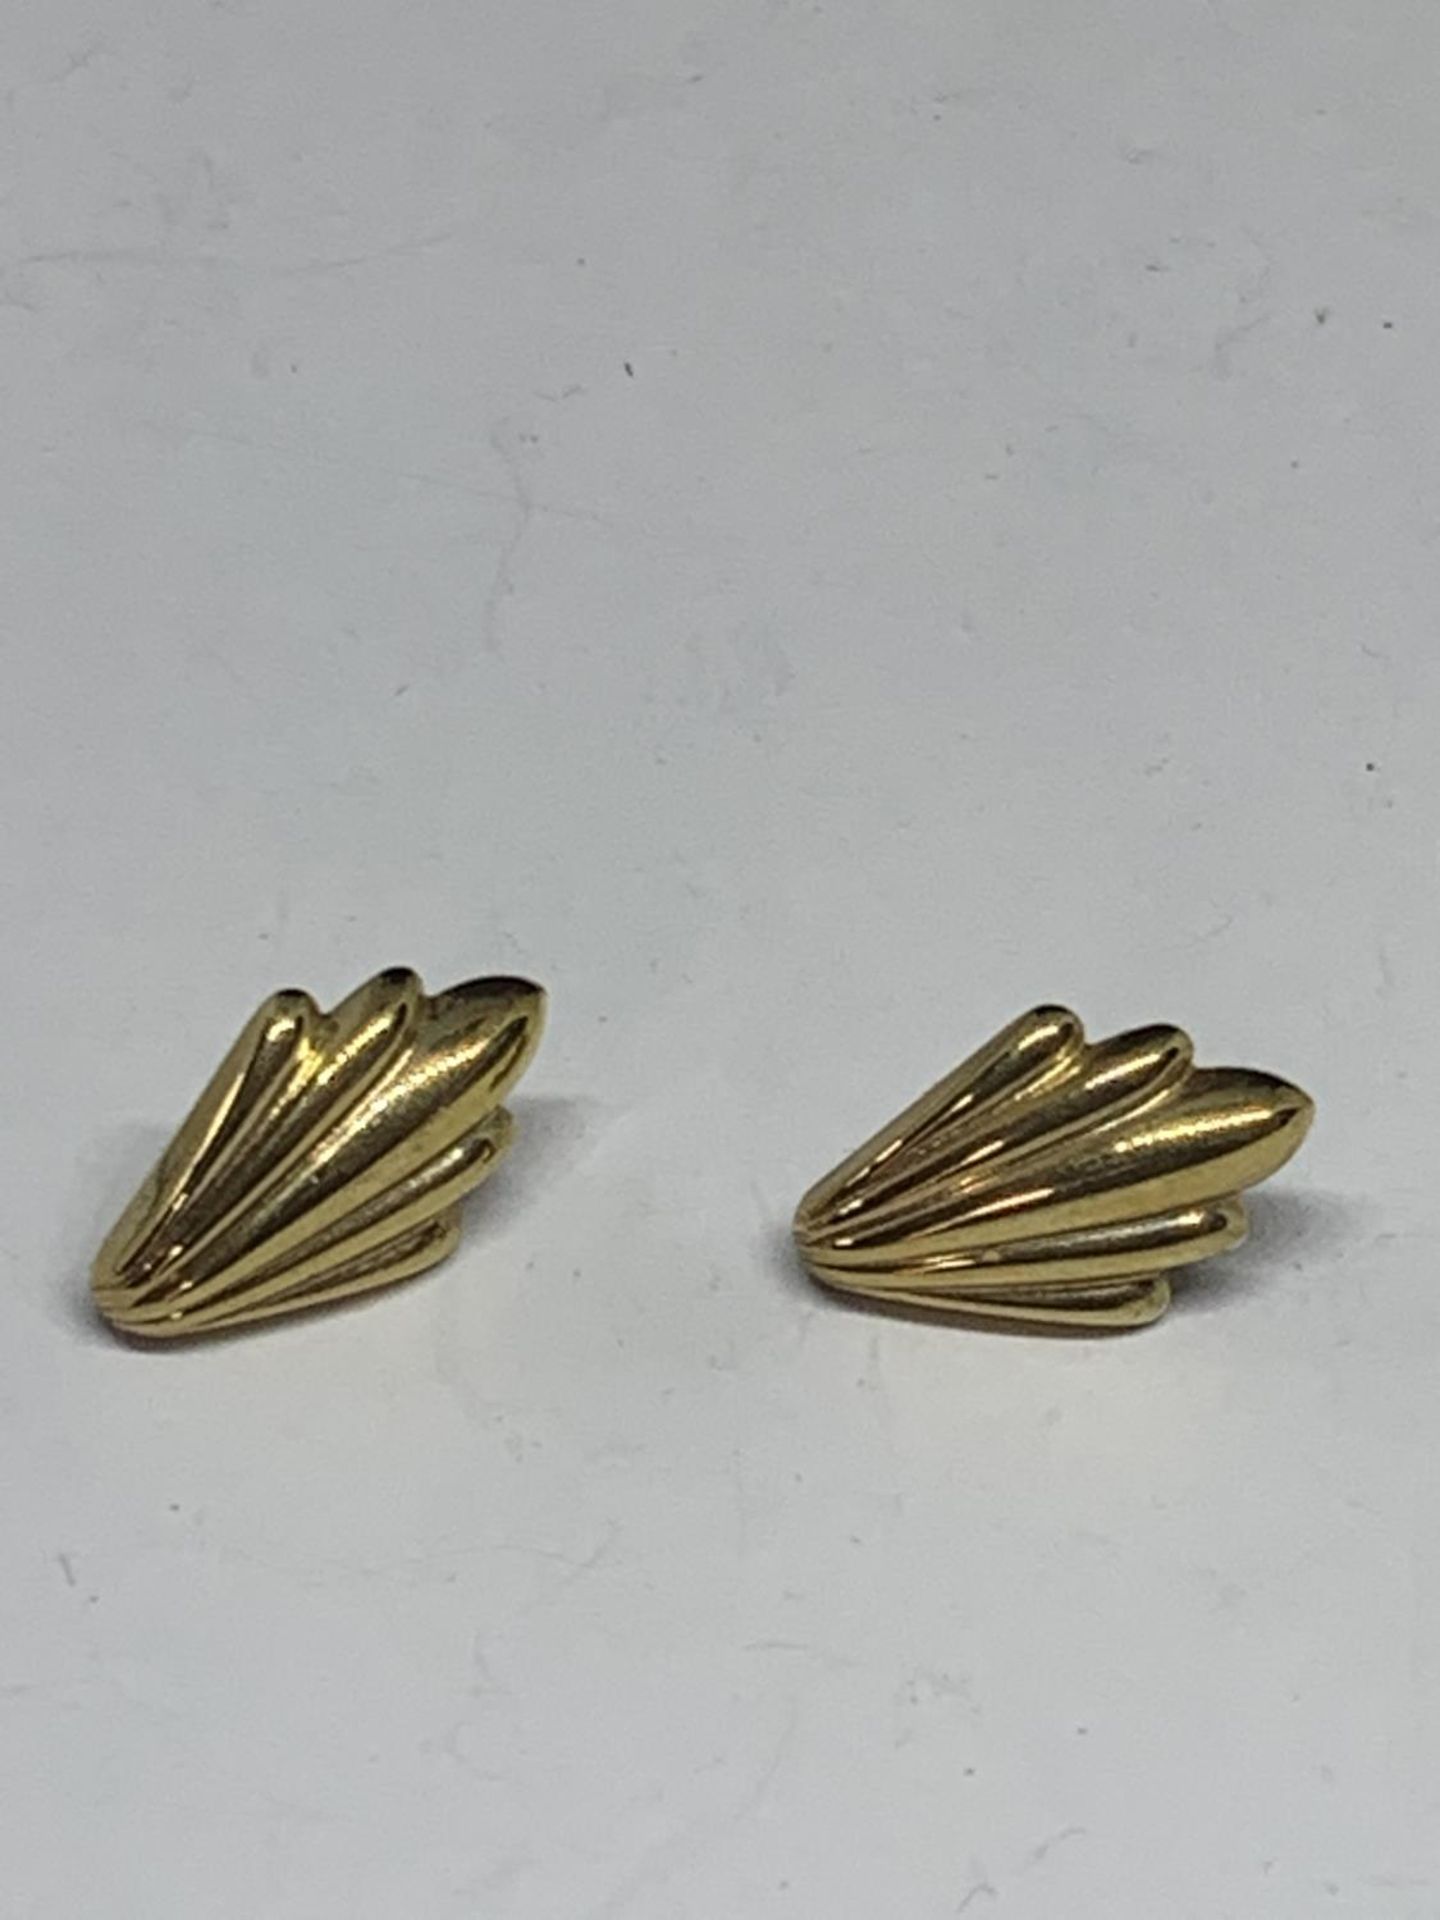 A PAIR OF 9 CARAT GOLD EARRINGS IN A PRESENTATION BOX